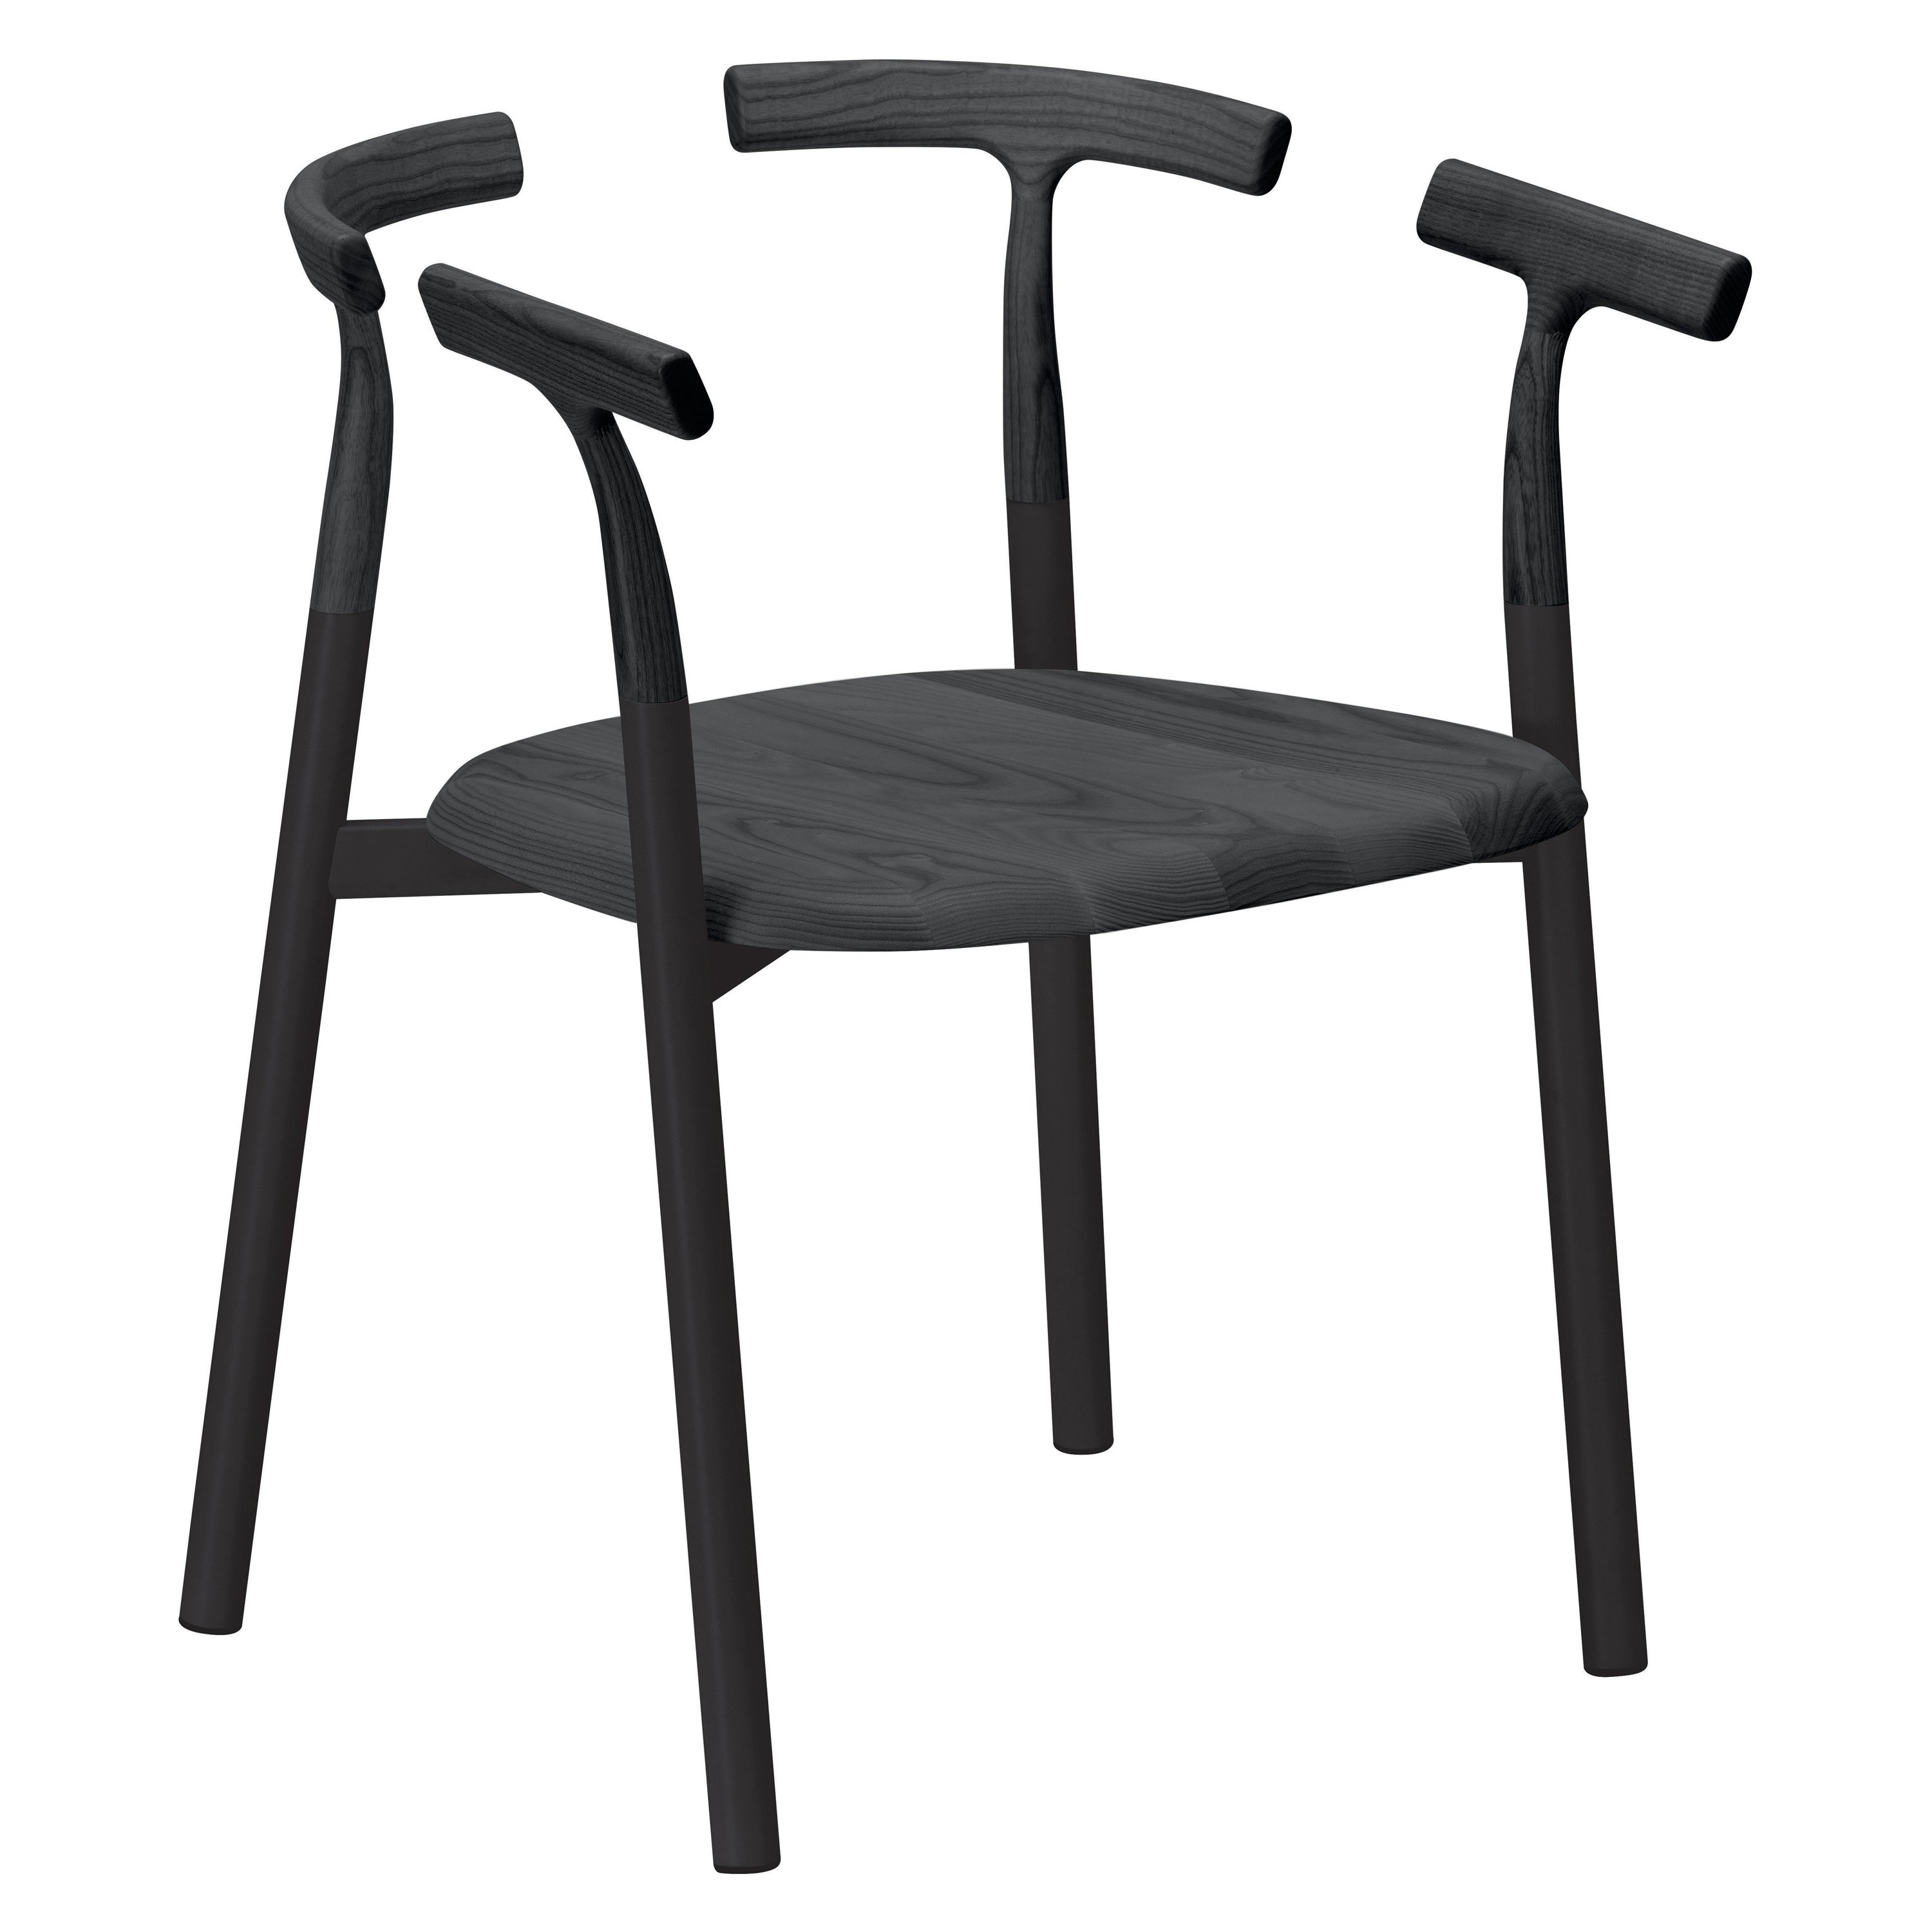 Alias 10C Twig 4 Chair in Ash Black Stained Seat with Black Lacquered Frame For Sale